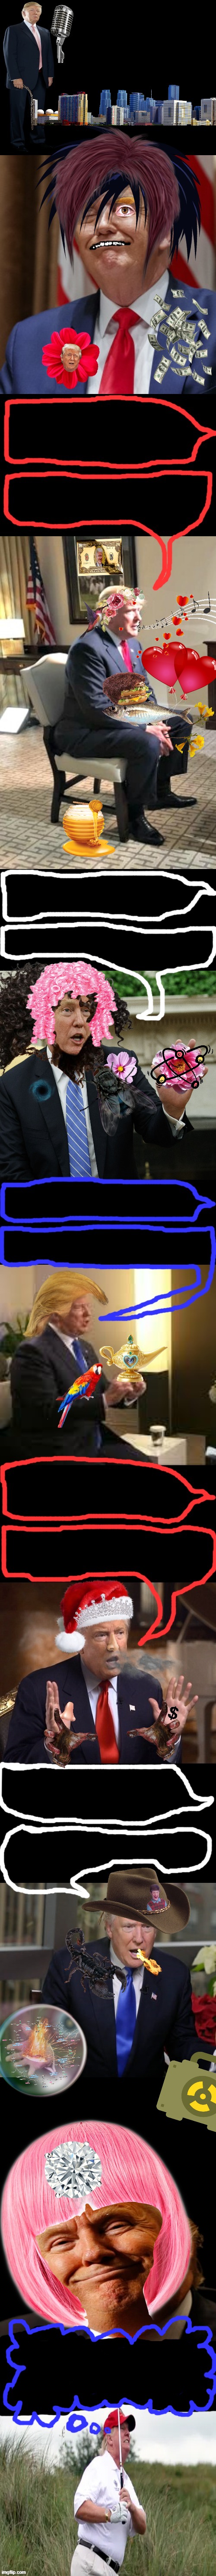 High Quality If You Had Trump In a Live Stream Interview Broadcast 2 Millions Blank Meme Template